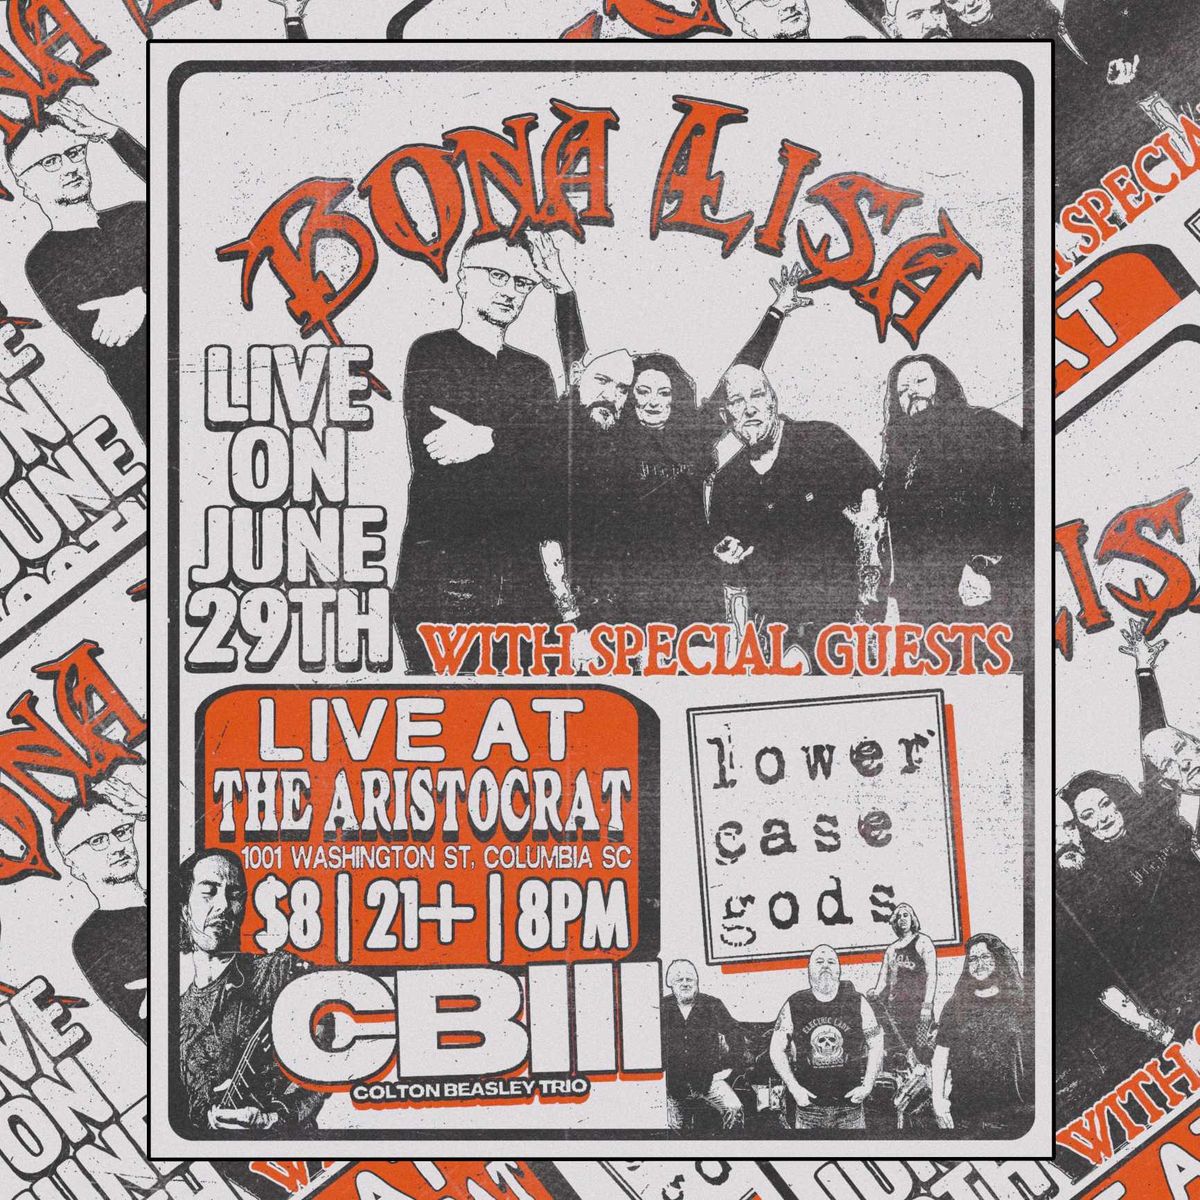 BONA LISA with Special Guests CBIII and lower case gods!